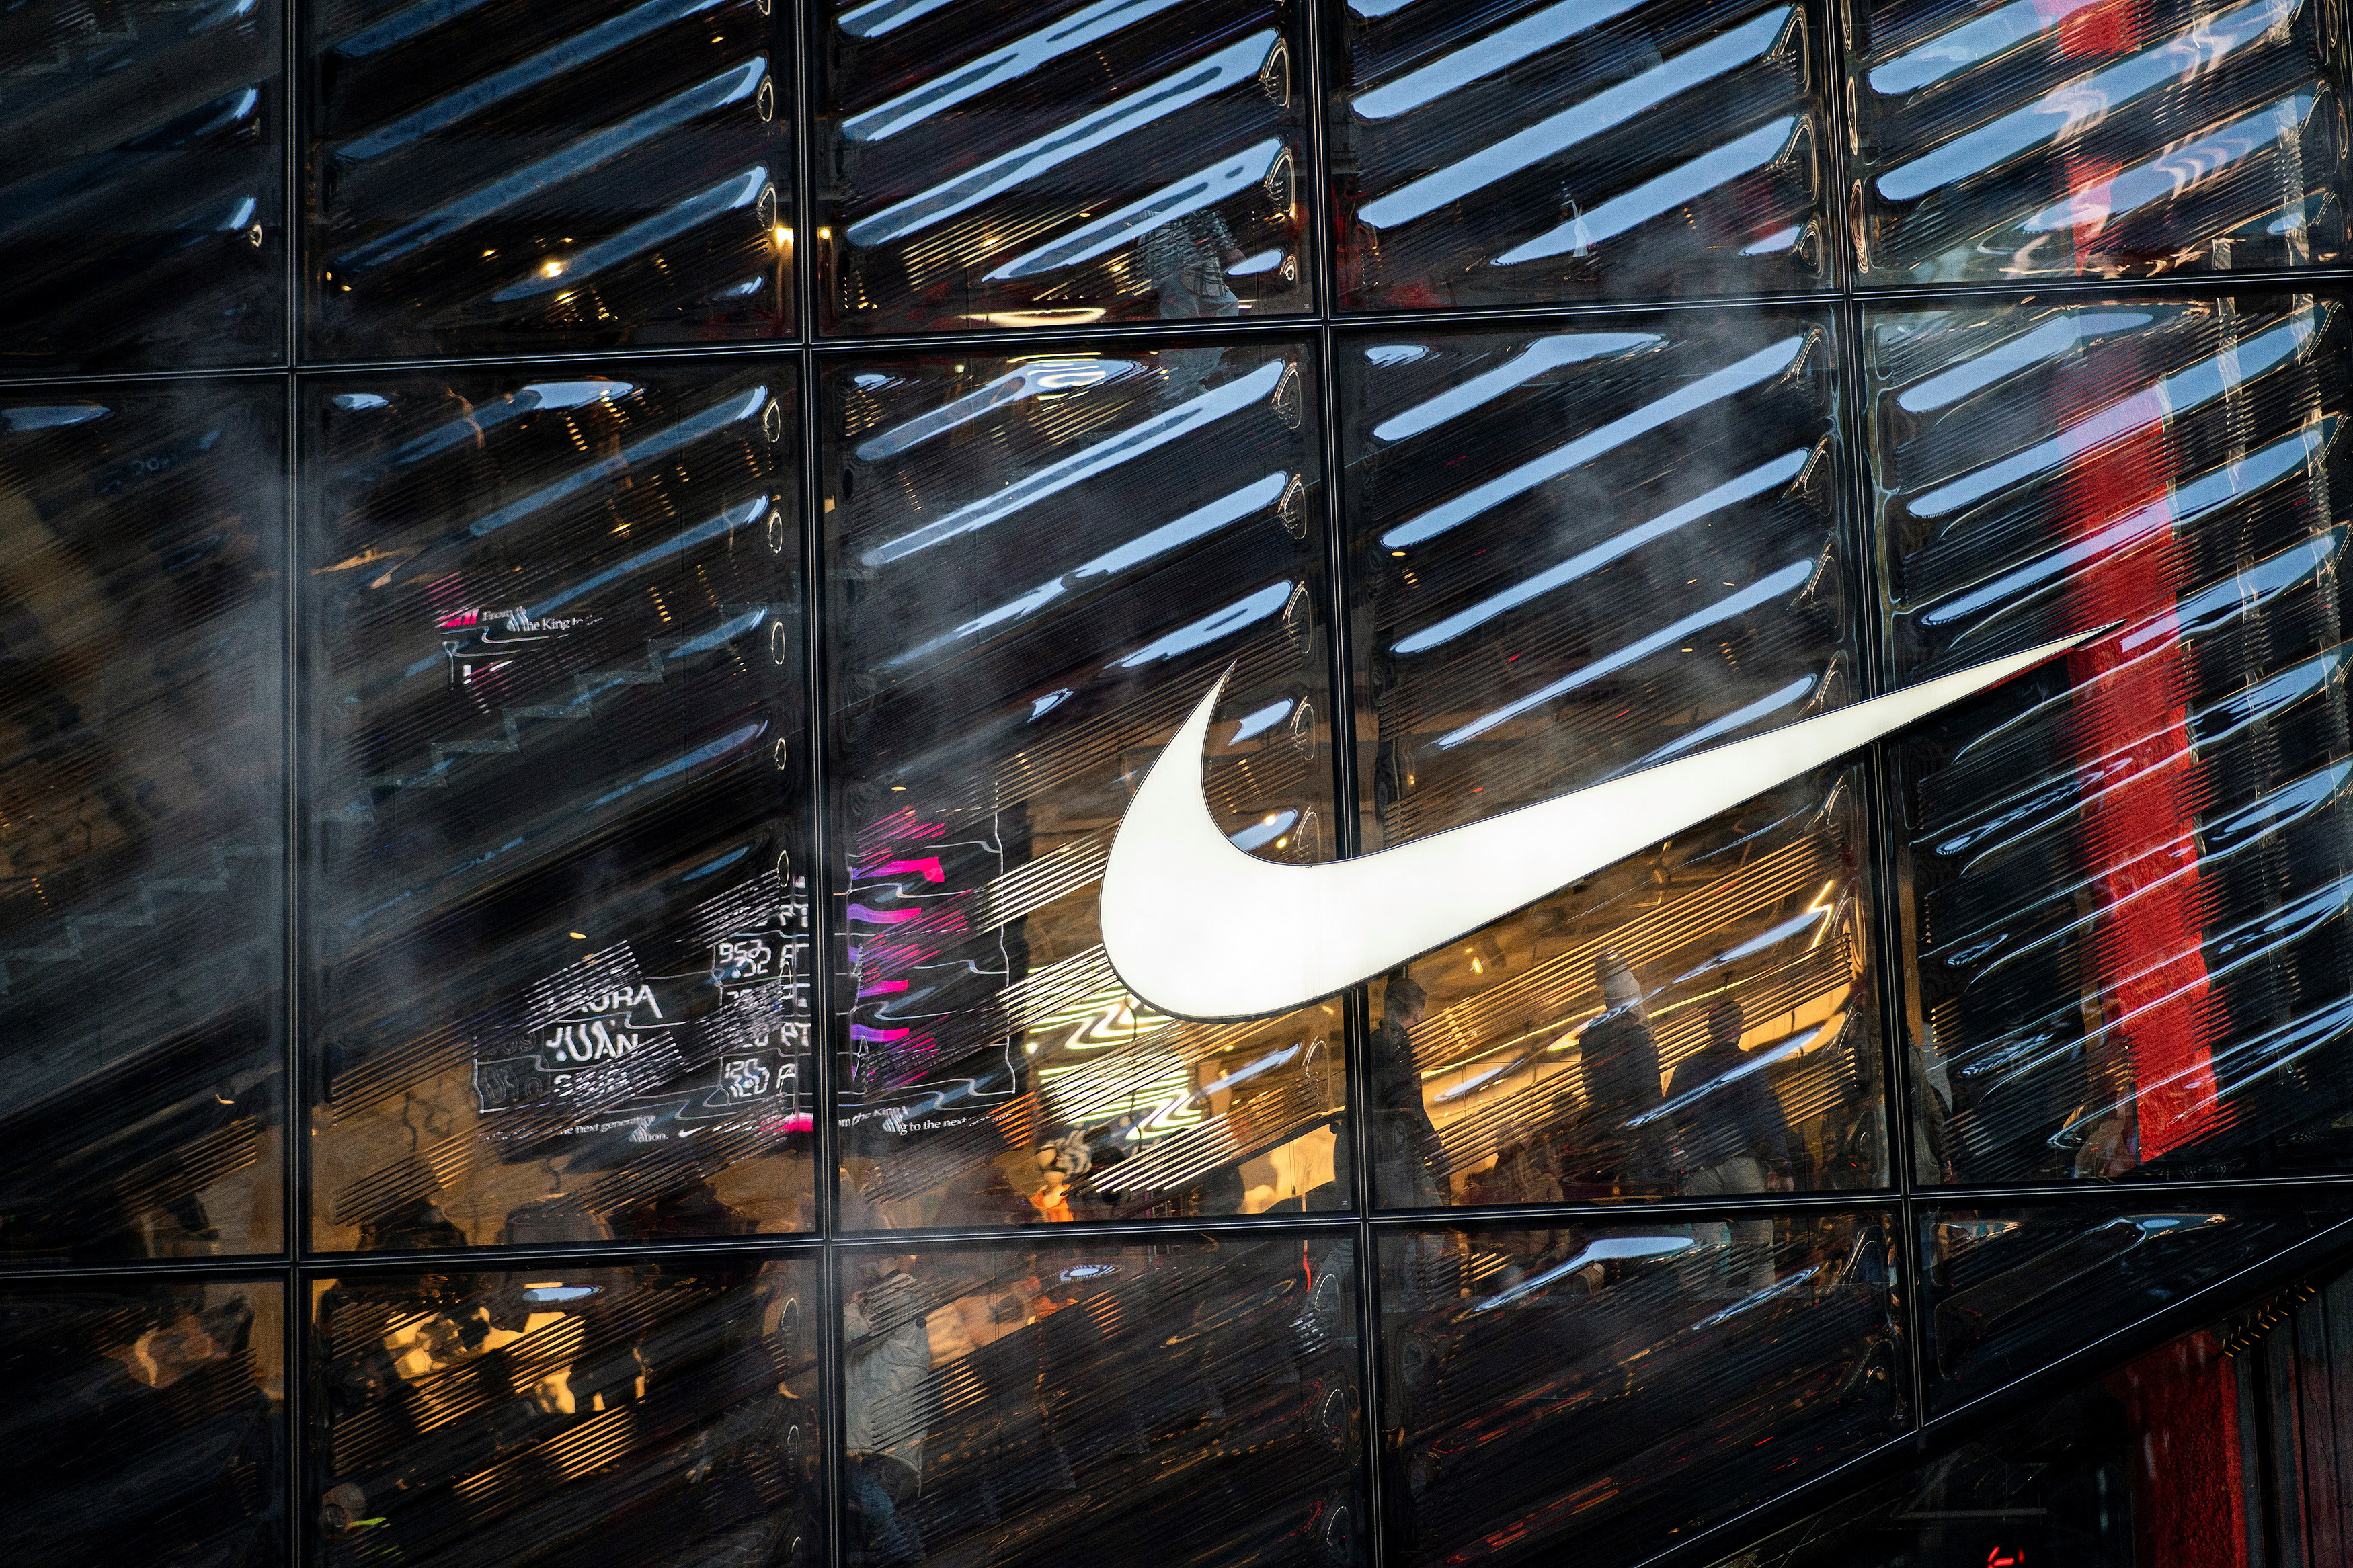 Faceta De hecho cinta Nike beats estimates boosted by discounts, promotions; shares surge |  Reuters